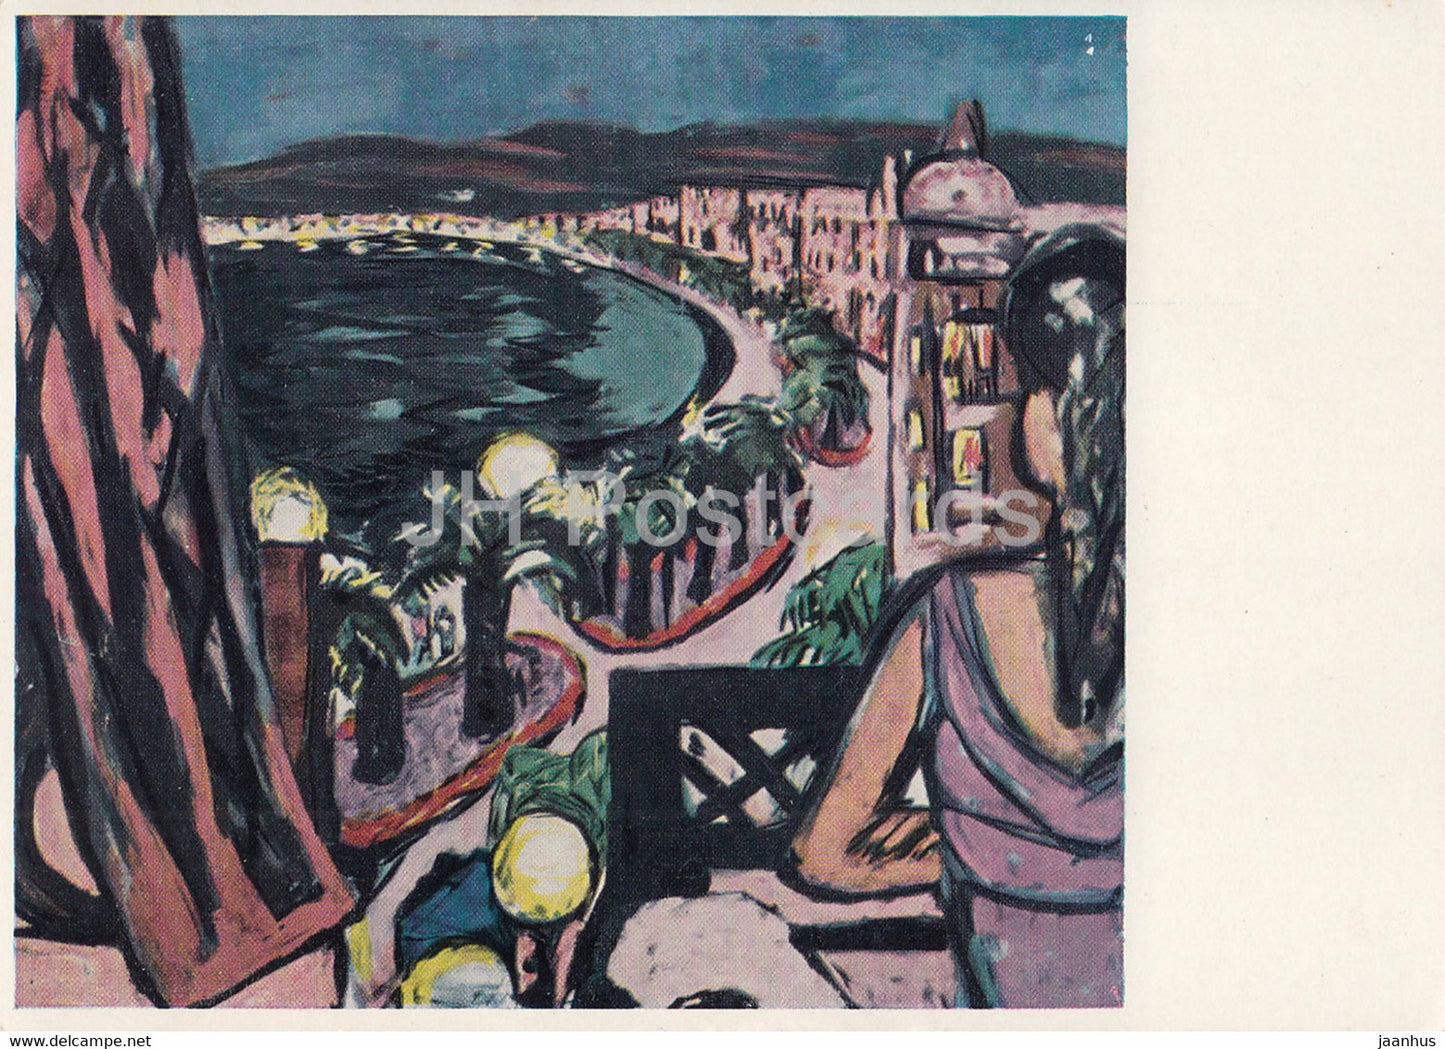 painting by Max Beckmann - Promenade des Anglais in Nizza - Nice - German art - Germany - unused - JH Postcards